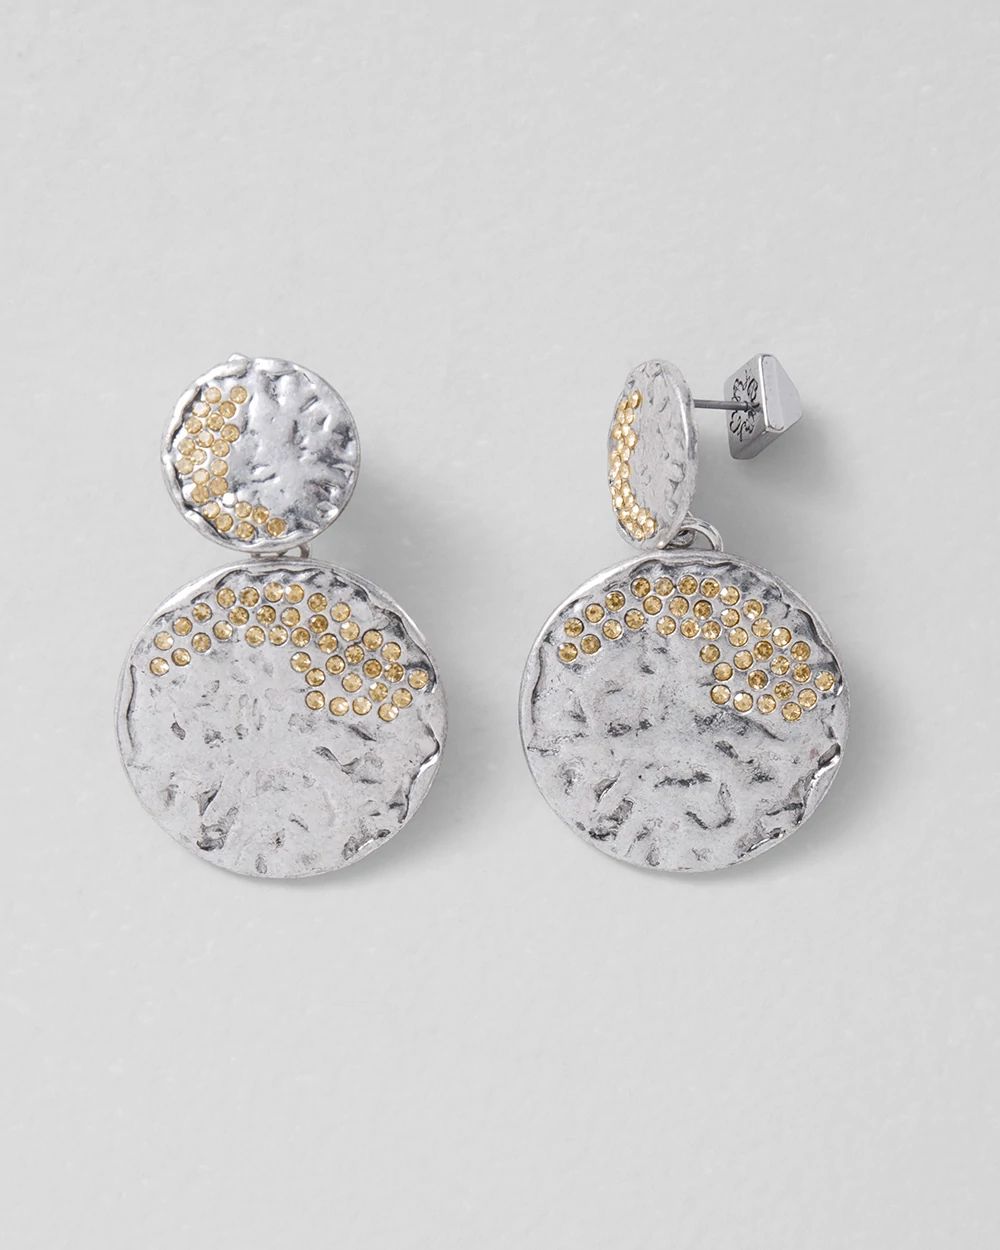 Silver Coin Pavé Earrings click to view larger image.